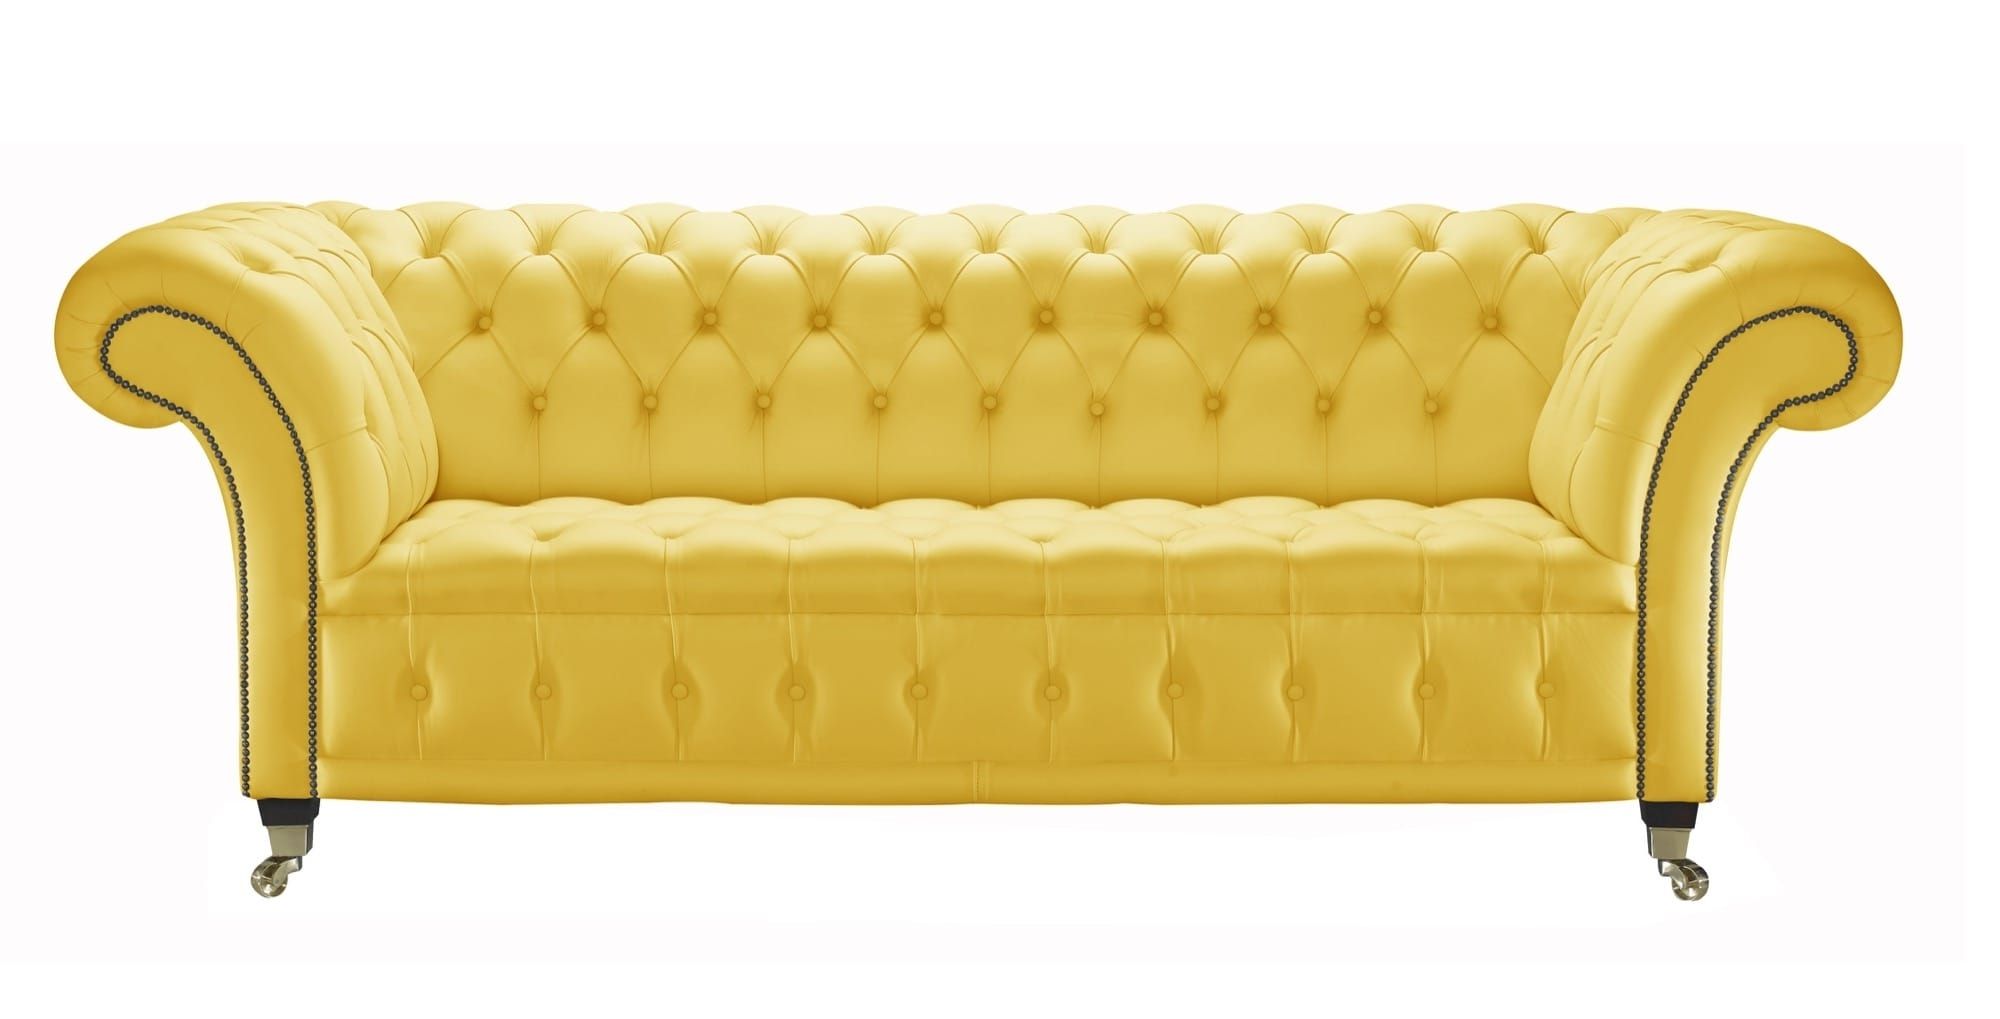 Fashionable Yellow Sofa Chairs For Yellow Leather Chesterfield Sofa, Handcrafted In The Uk (View 10 of 15)